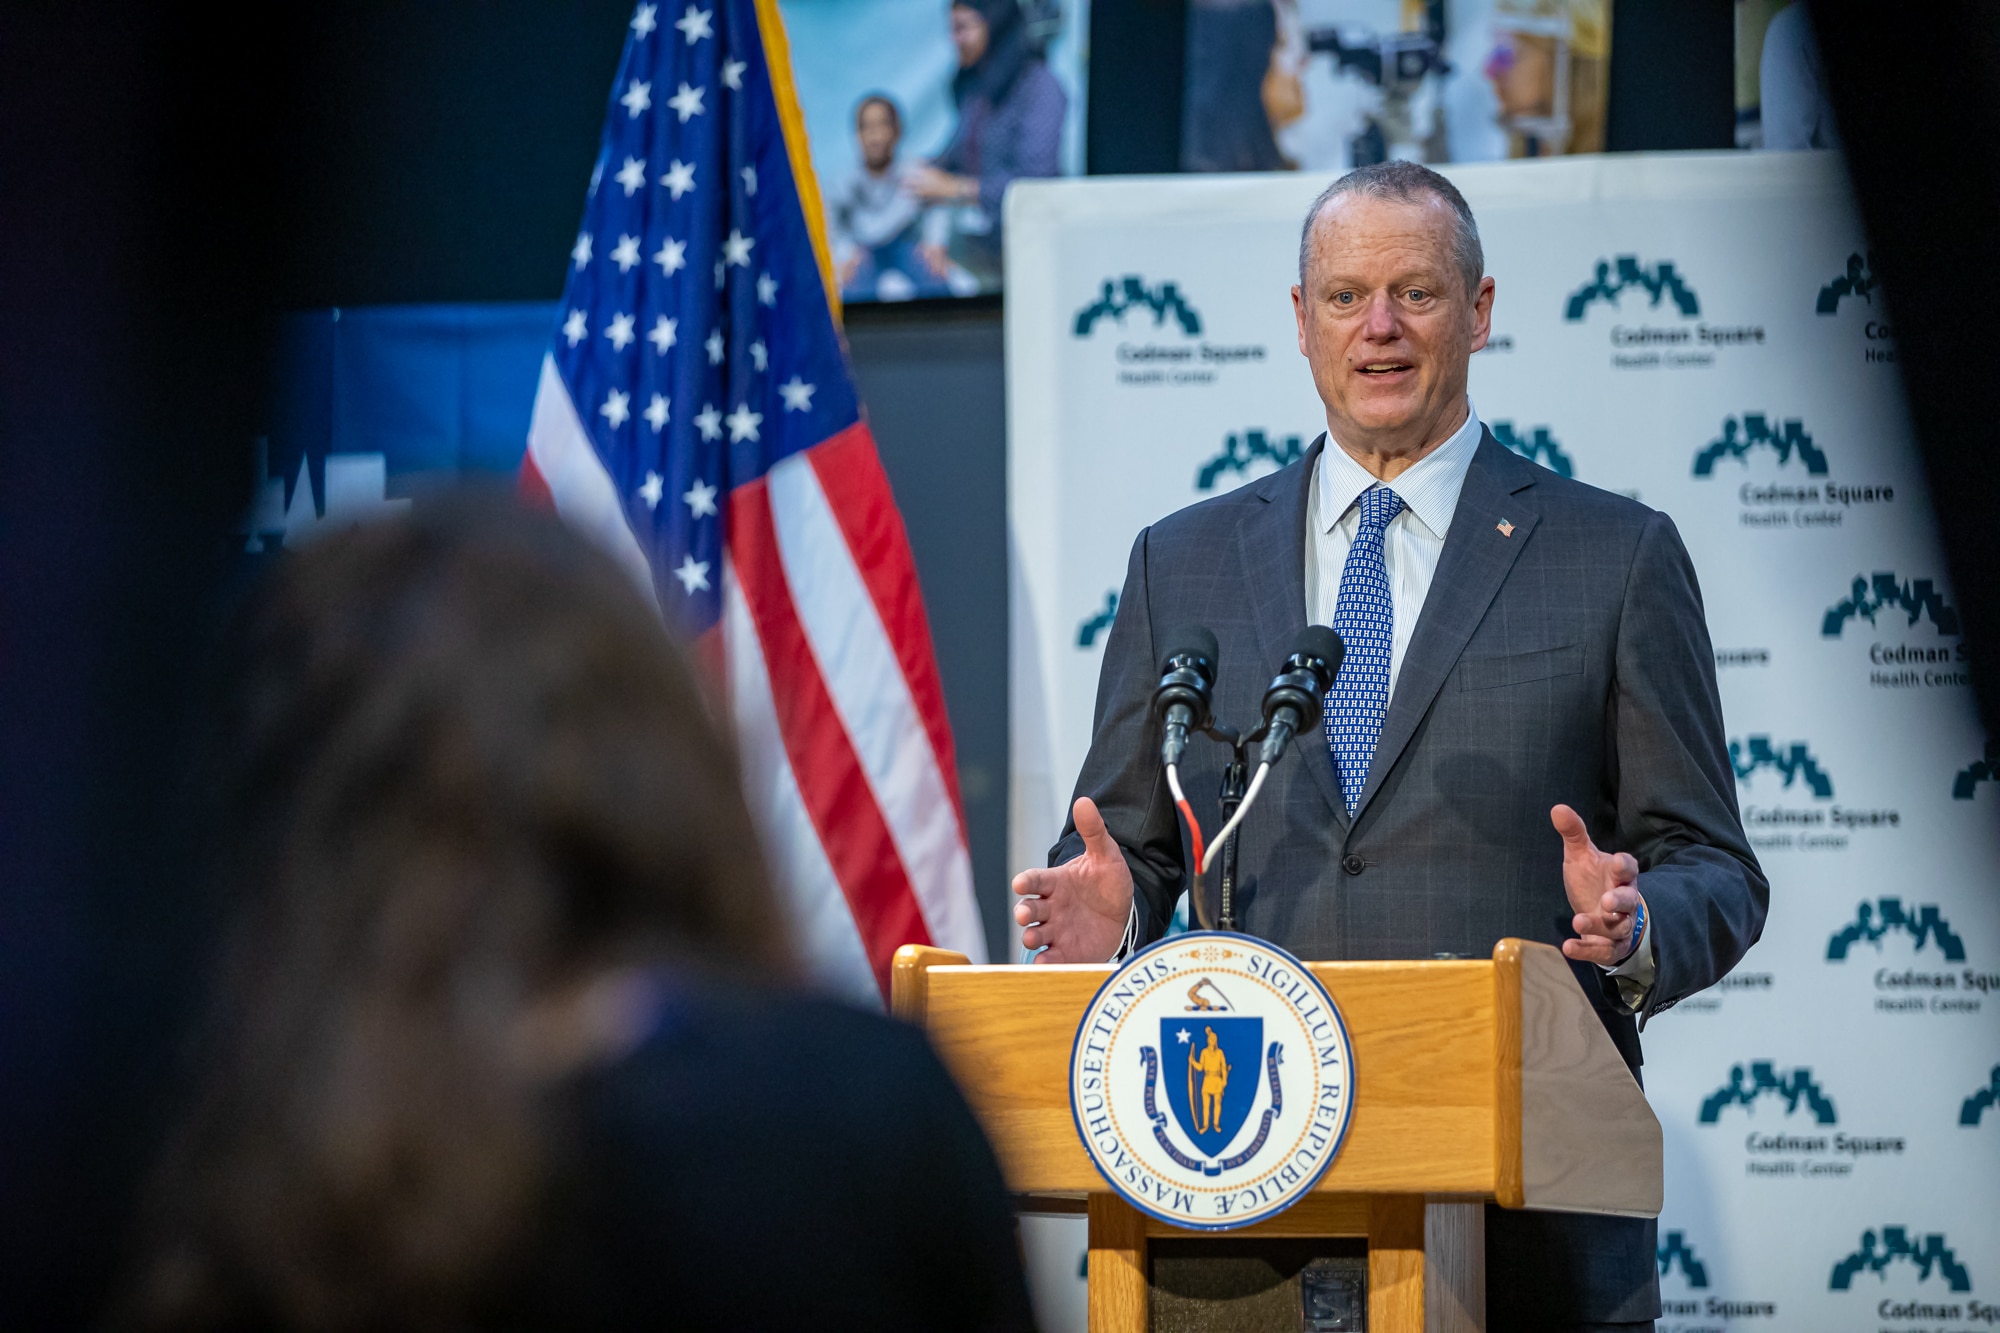 Baker-Polito Administration Files Health Care Legislation Aimed at Expanding Access to Care